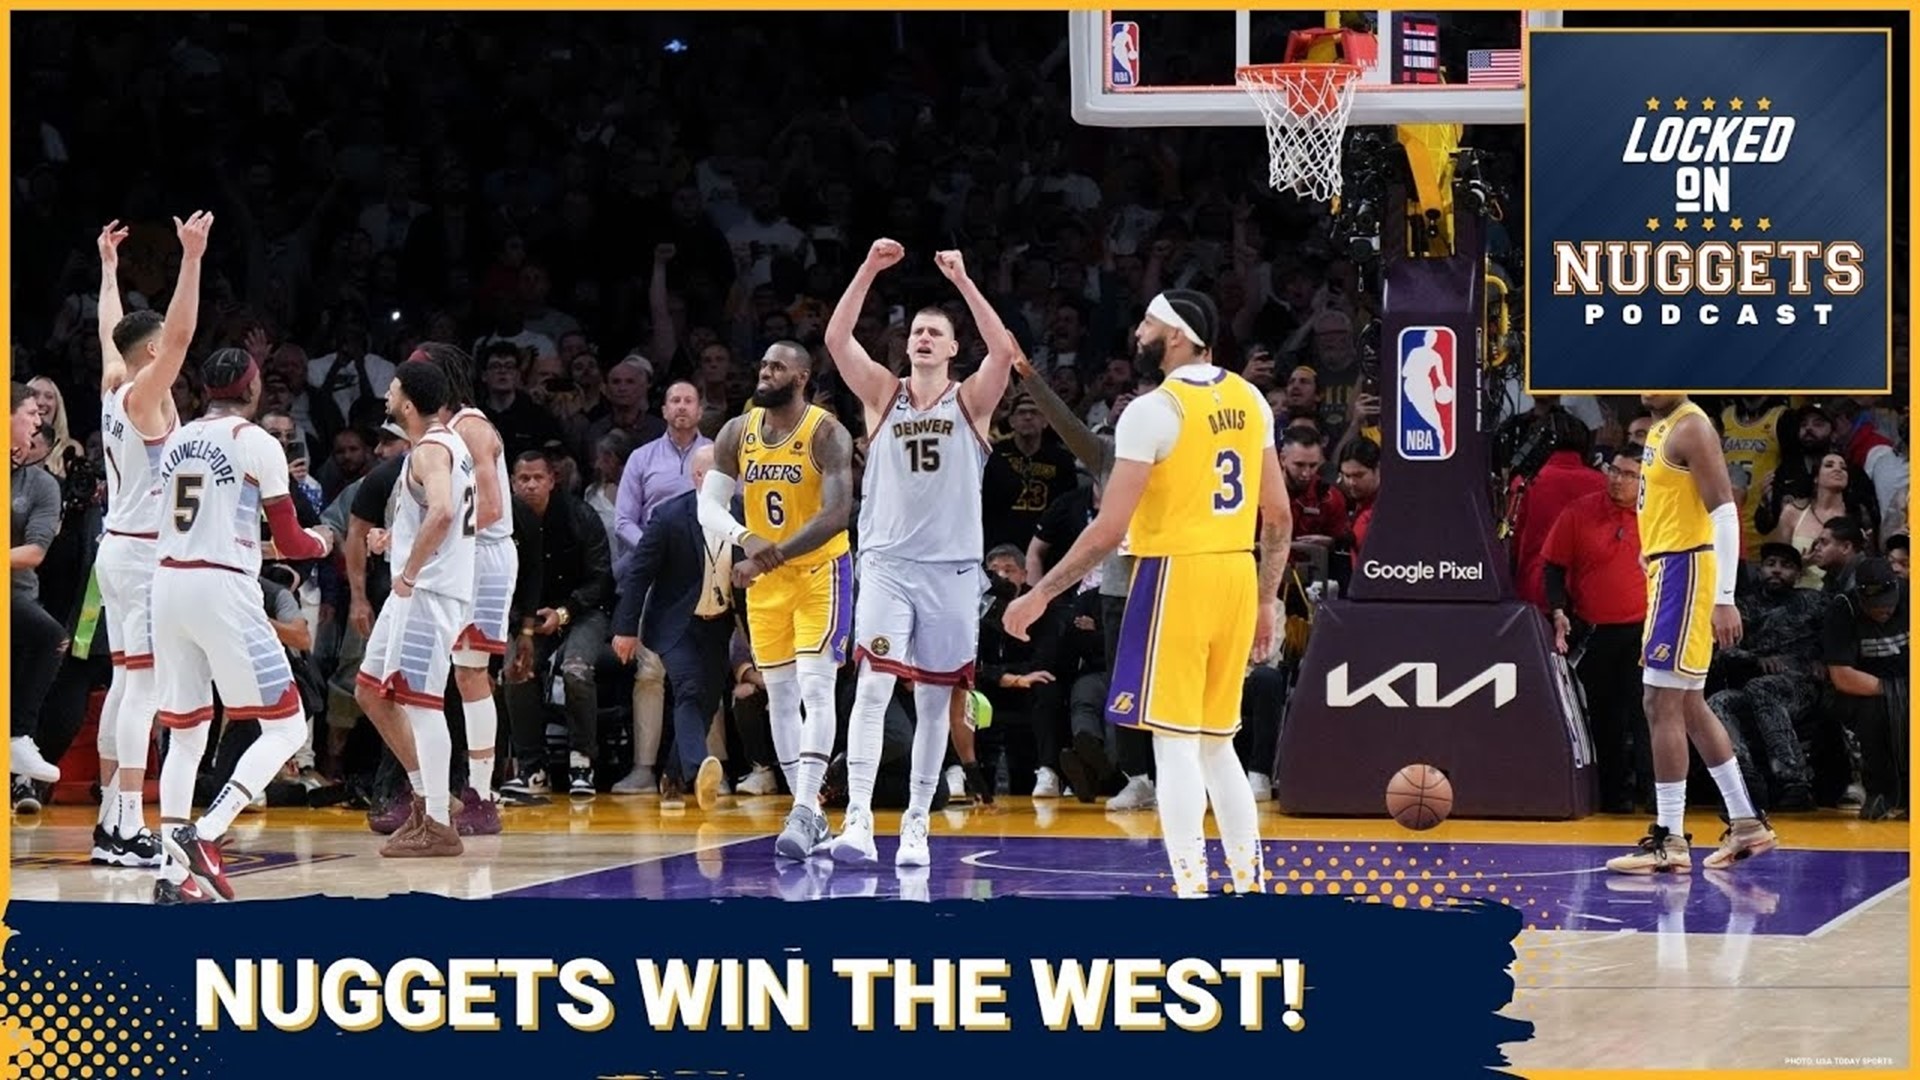 Your Denver Nuggets are Western Conference Champions! The Nuggets sweep the Lakers 4-0 in the WCF behind another marvelous triple double from Nikola Jokic.